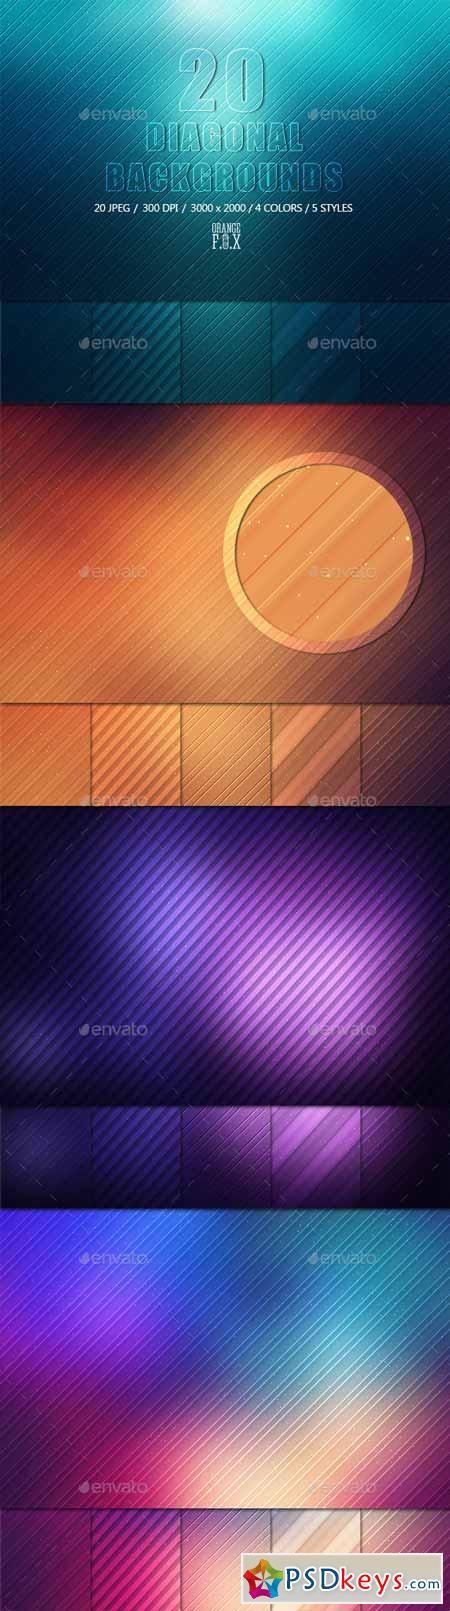 20 Diagonal Abstract Backgrounds 11195929[